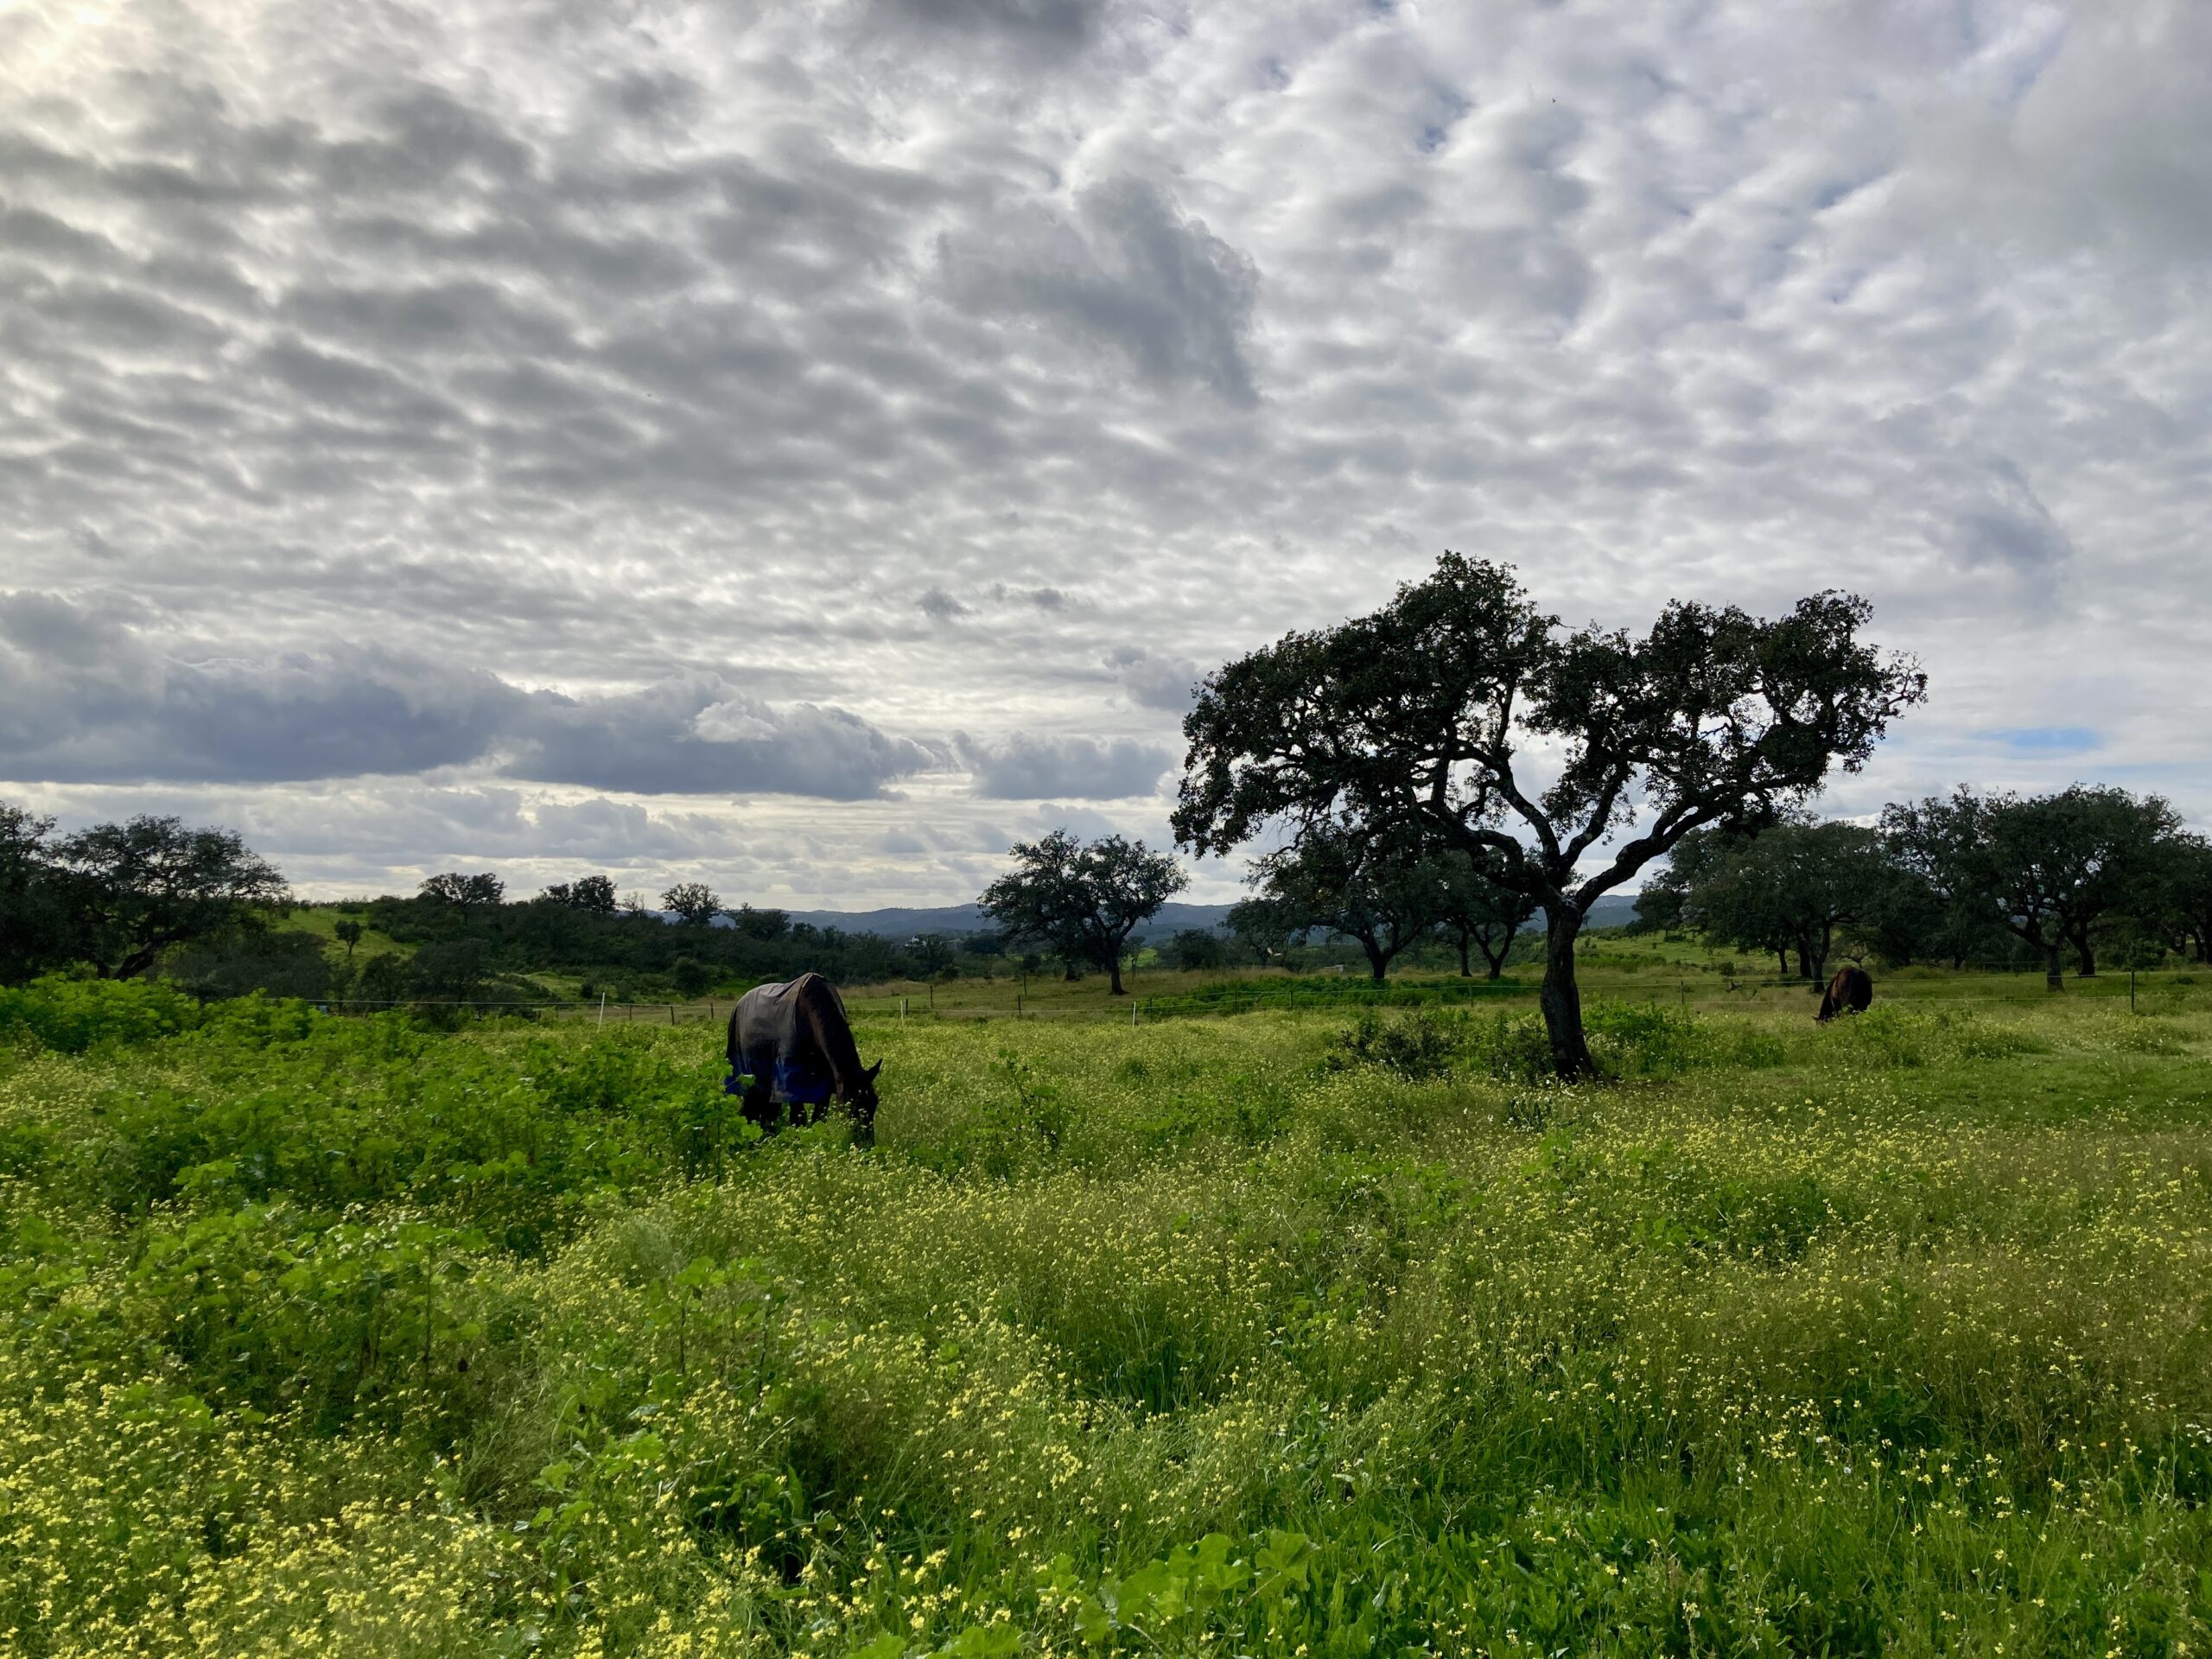 Two grazing horses in a lush pasture under a cloudy sky